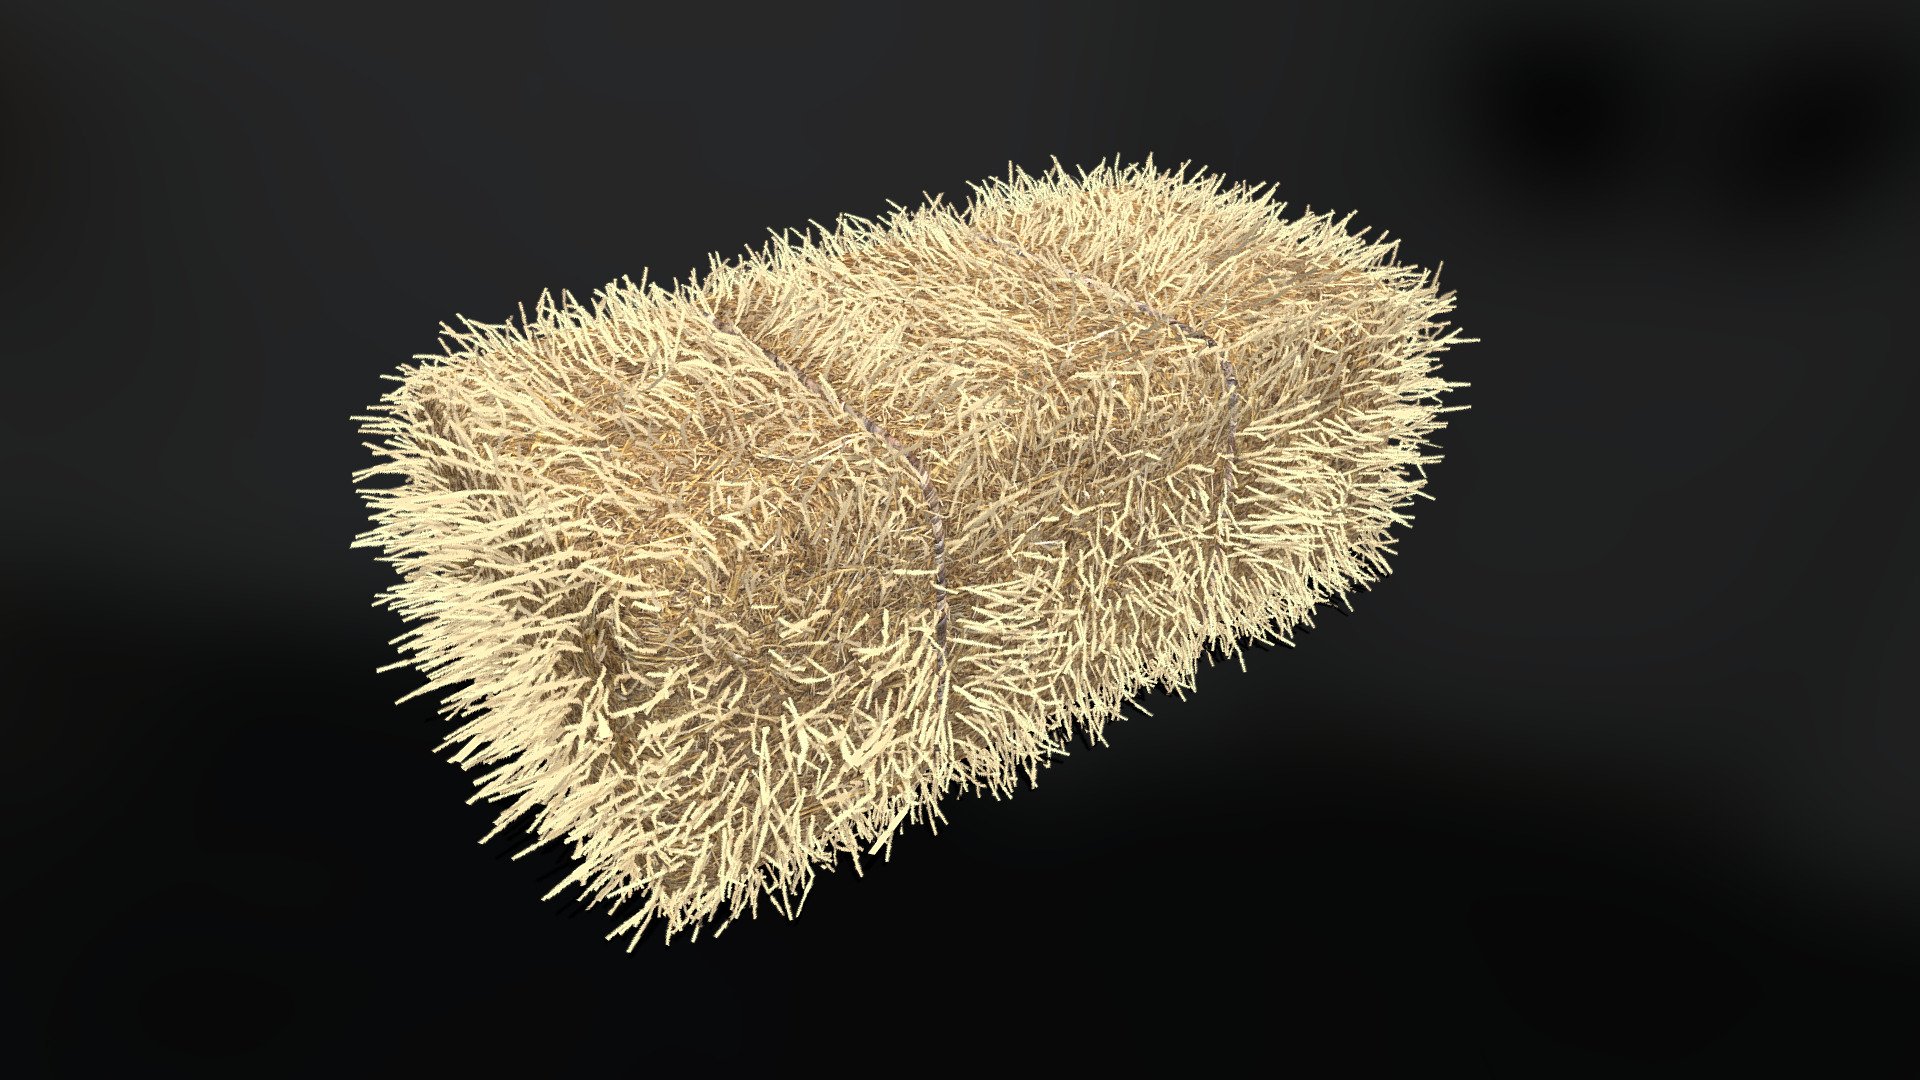 This is a hay bale, intended for use in games or any other real-time environment. 
This model is also included in a larger pack, which contains multiple haystacks and hay bales.
The model is game-ready but relatively high-poly. 
It is intended to be used with performance-enhancing game engine techniques such as auto LODs, distance culling, etc.

4k .tga textures are included in the download:




BaseColor.tga

Normal.tga

ORM.tga (This is a packed texture, where the RGB channels each contain different texture maps)
Red Channel = Ambient Occlusion - Green Channel = Roughness - Blue Channel = Metallic

Model + Textures by: David Falke

Website: https://www.grip420.com/

Discord: Follow us on Discord

Facebook Follow us on Facebook - Haybale Rectangular - 01 - GameReady - Buy Royalty Free 3D model by GRIP420 3d model